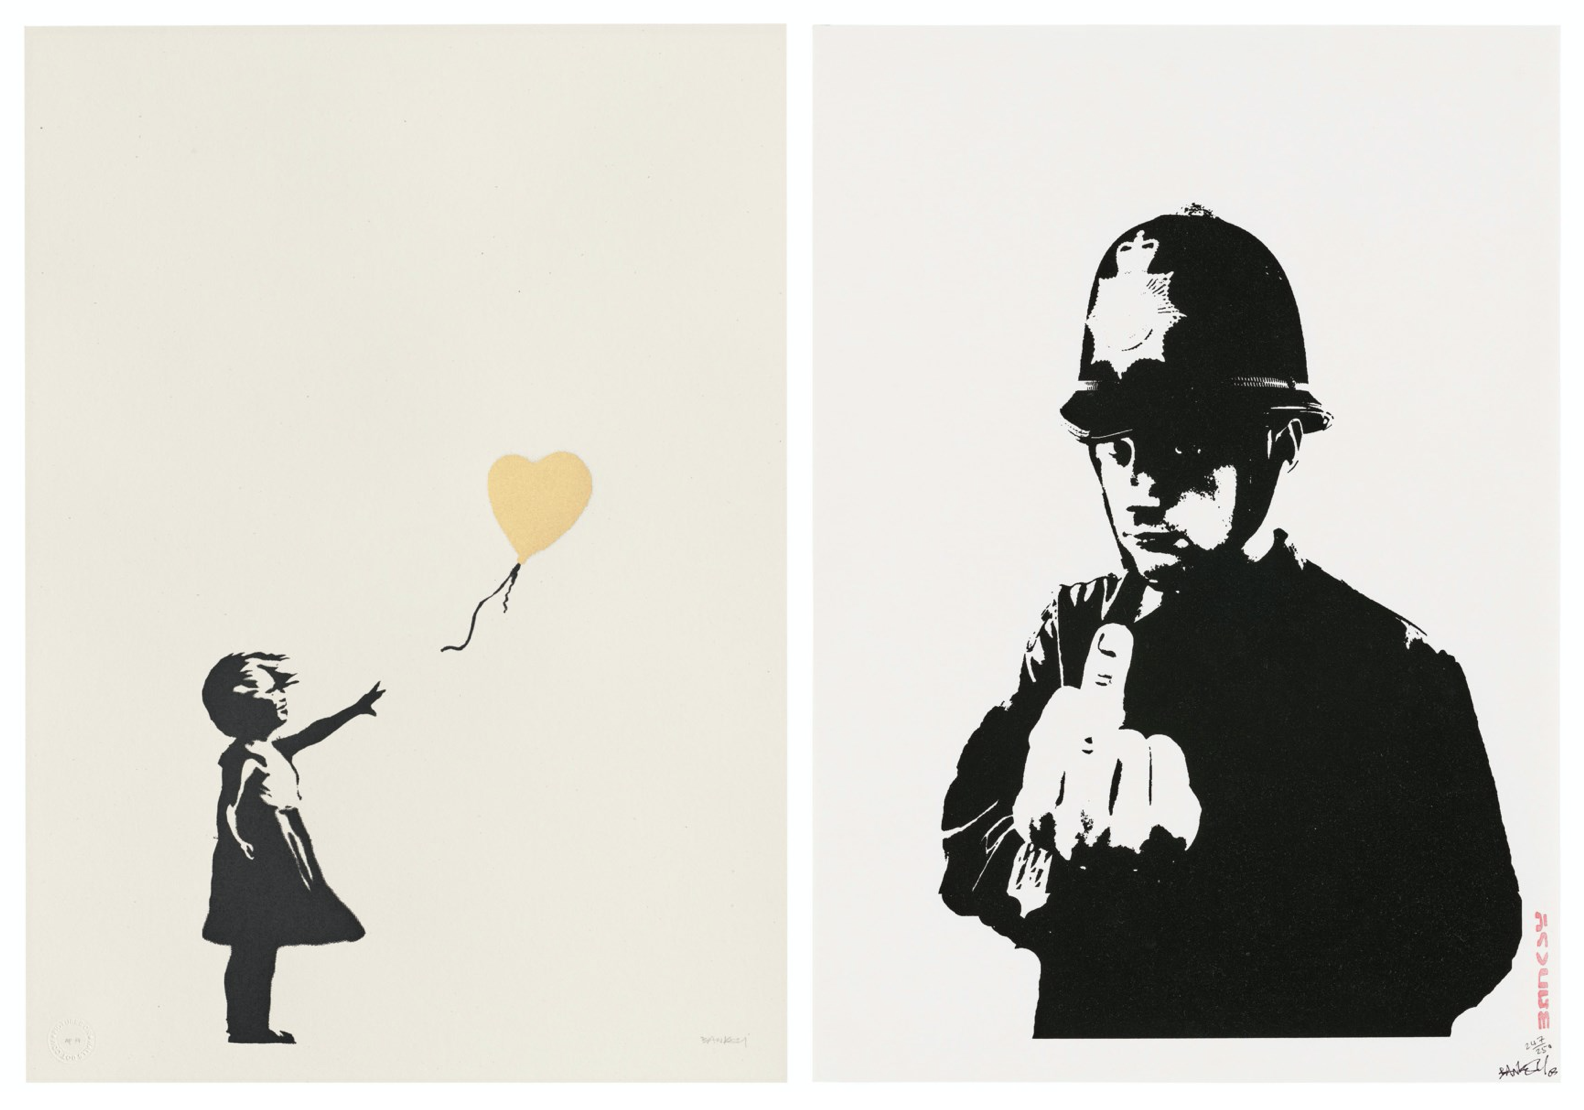 Banksy: I can’t believe you morons actually buy this sh*t" a